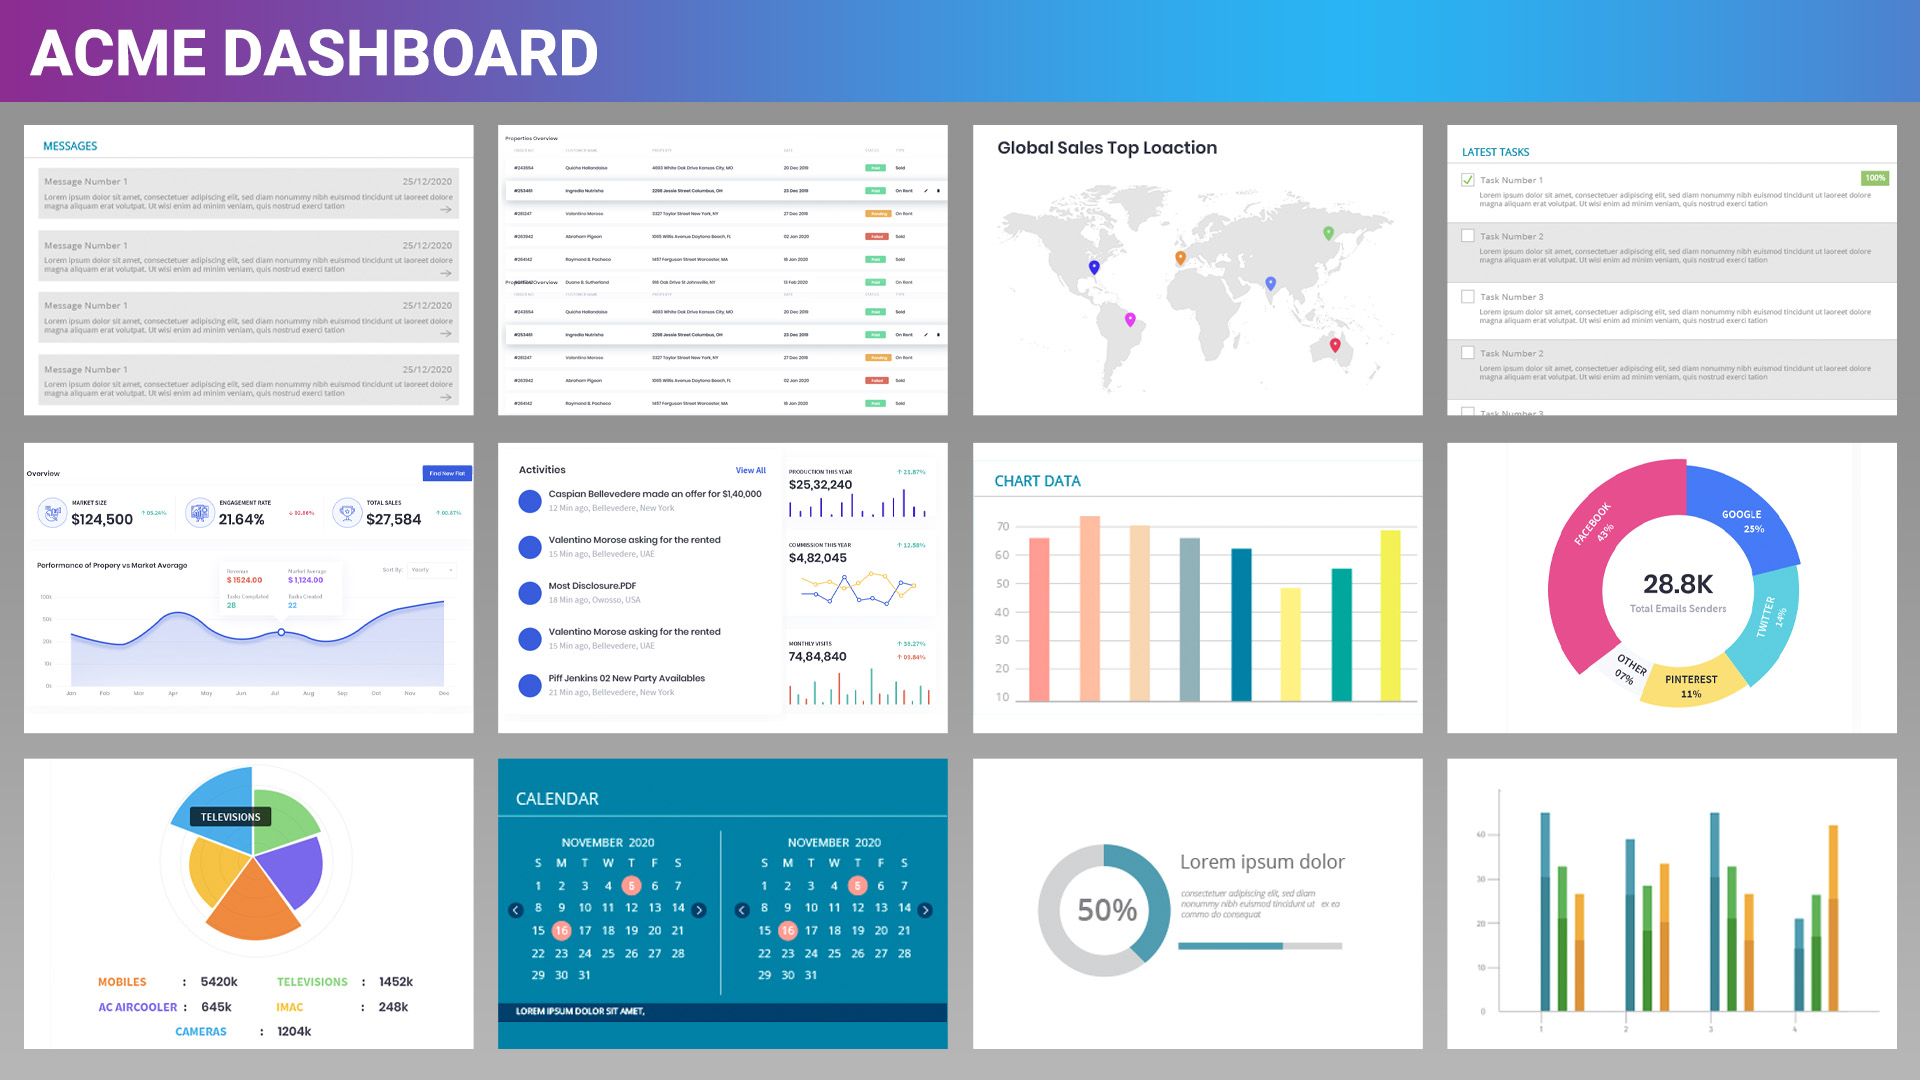 Manufacturing and supply chain business intelligence dashboard